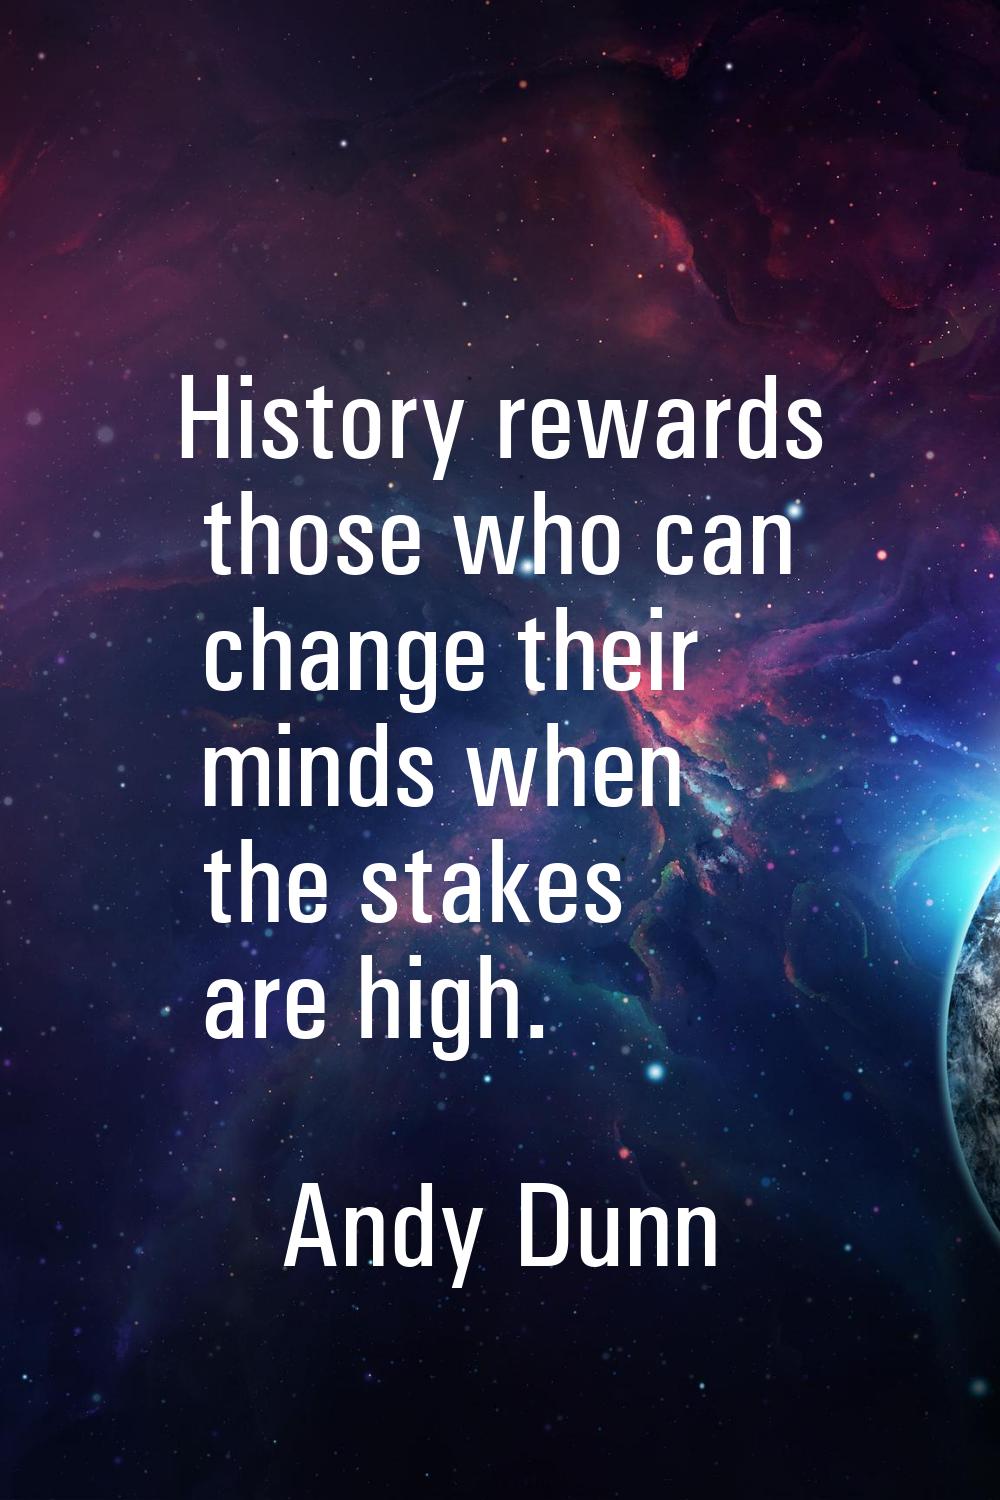 History rewards those who can change their minds when the stakes are high.